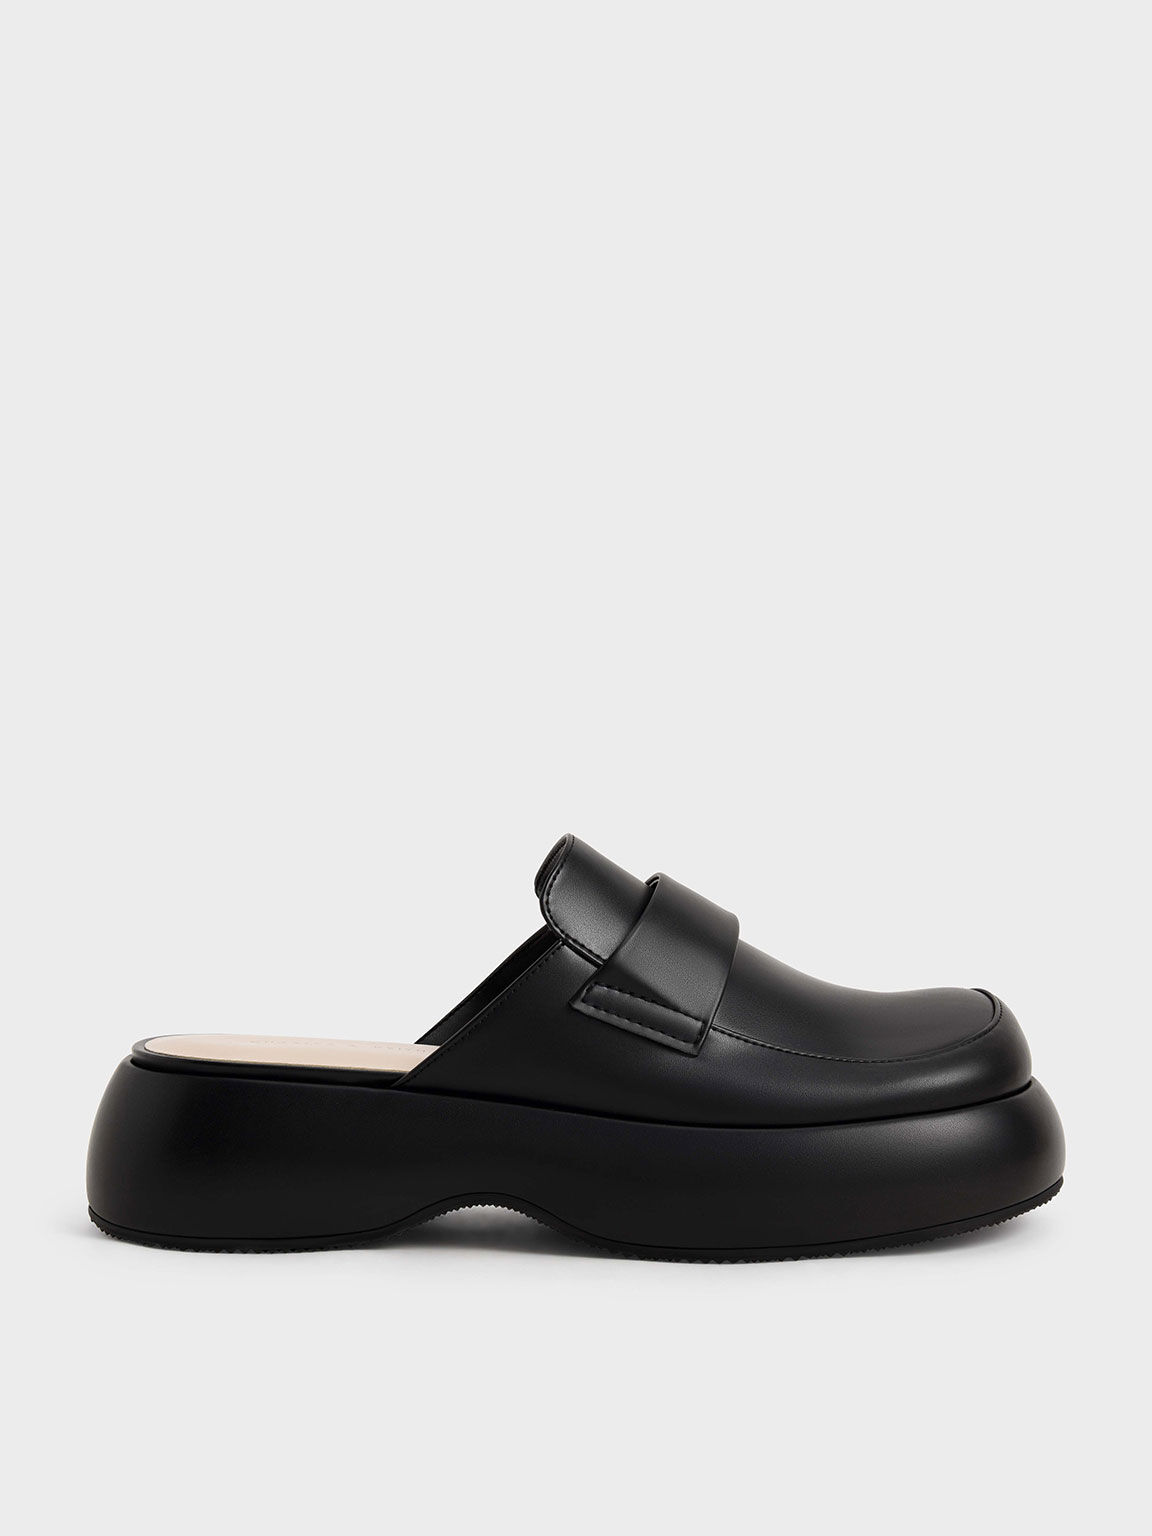 Black Rory Platform Penny Loafer Mules - CHARLES & KEITH HK